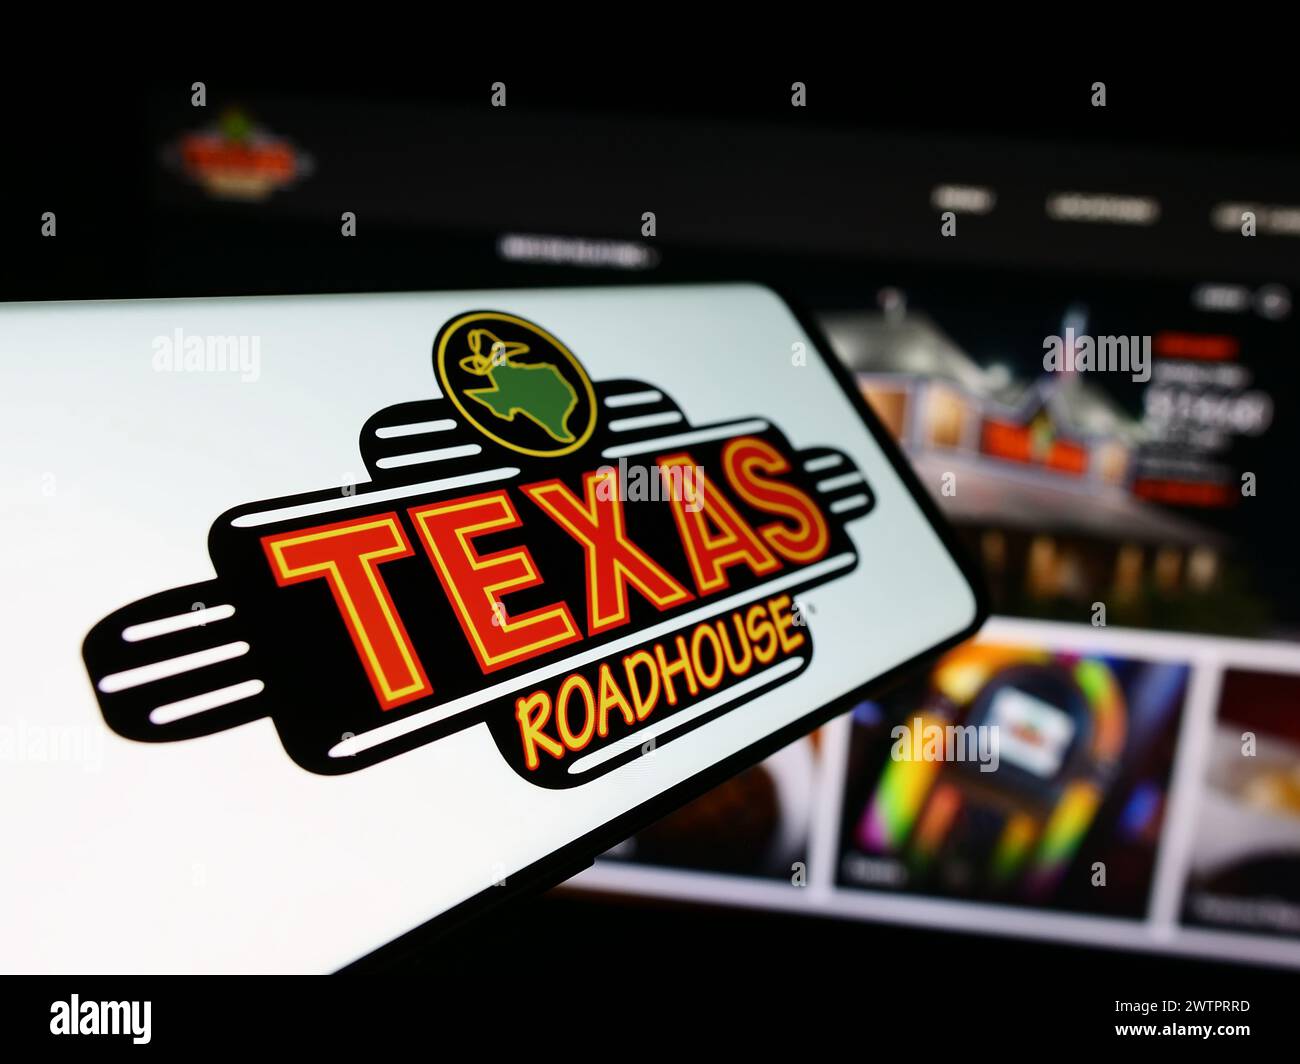 Mobile phone with logo of American steakhouse restaurant company Texas Roadhouse Inc. in front of website. Focus on left of phone display. Stock Photo